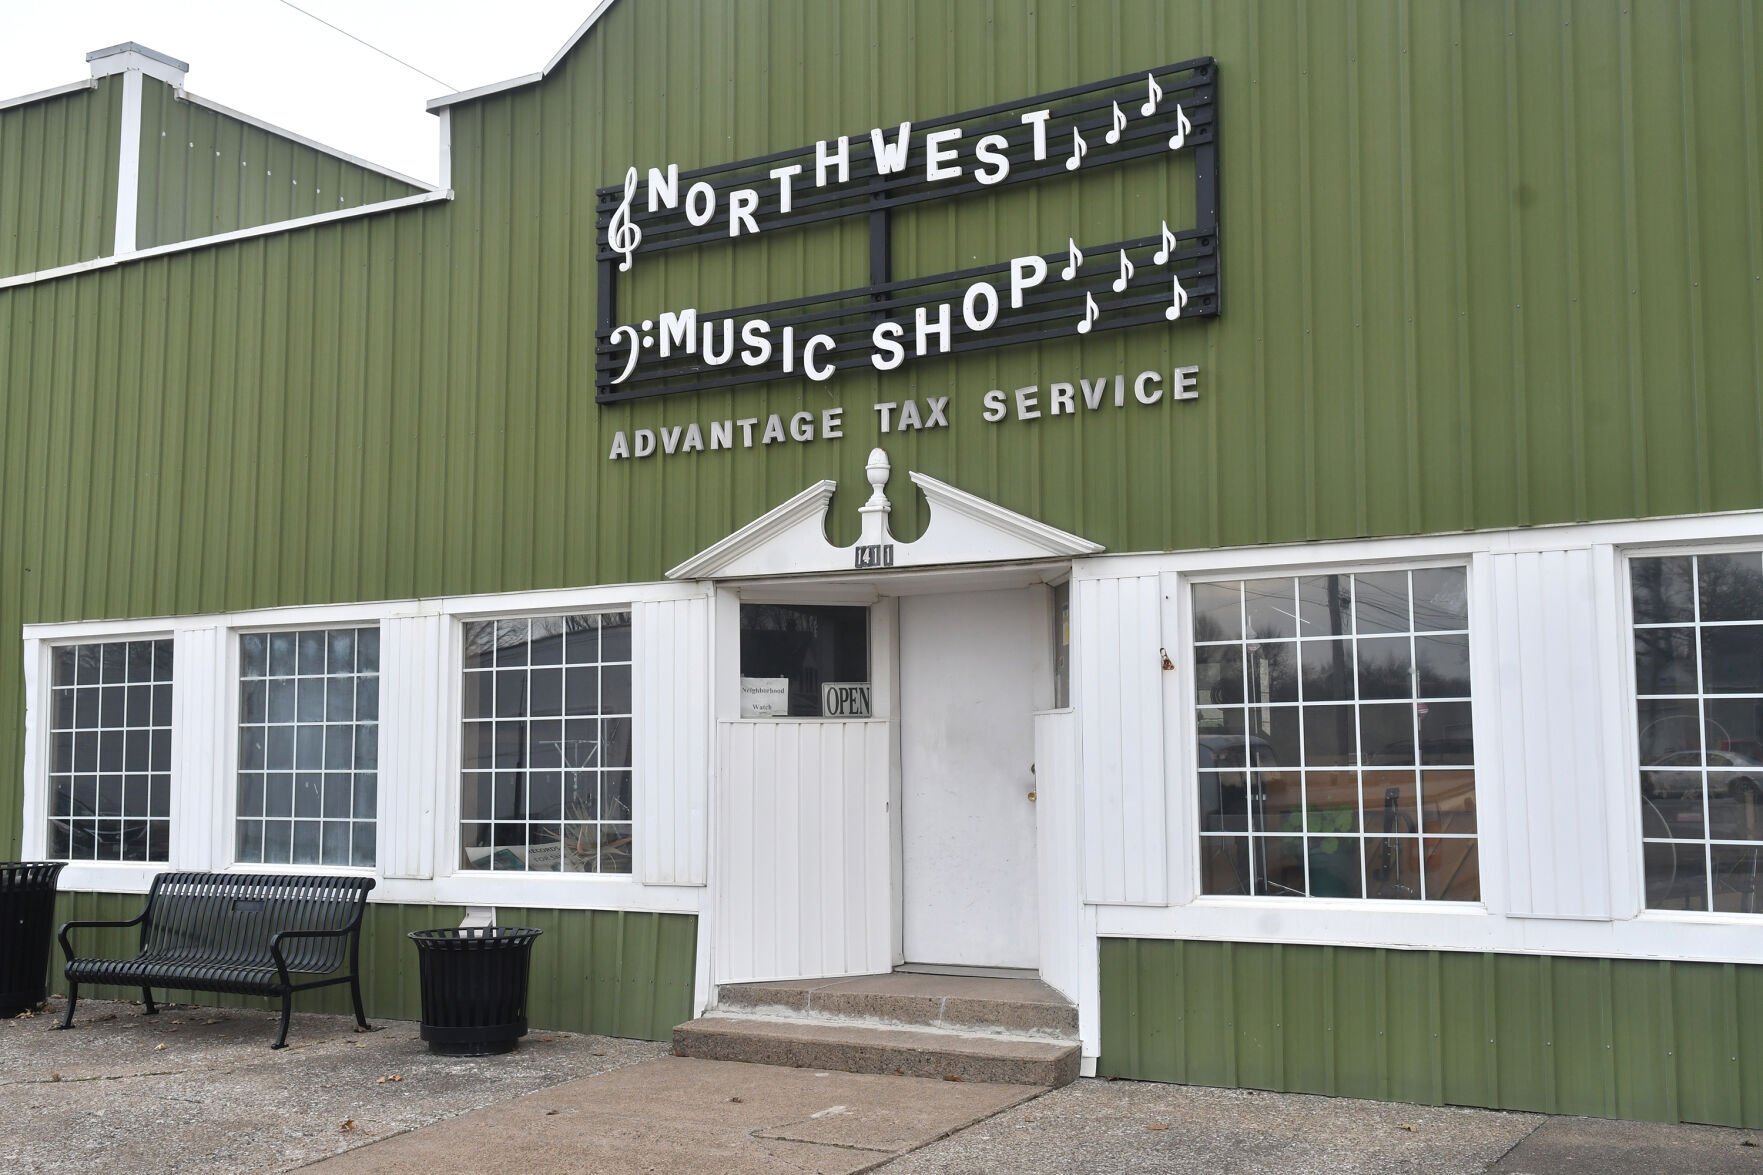 Northwest Music Shop is filled to the brim with everything a musician could need